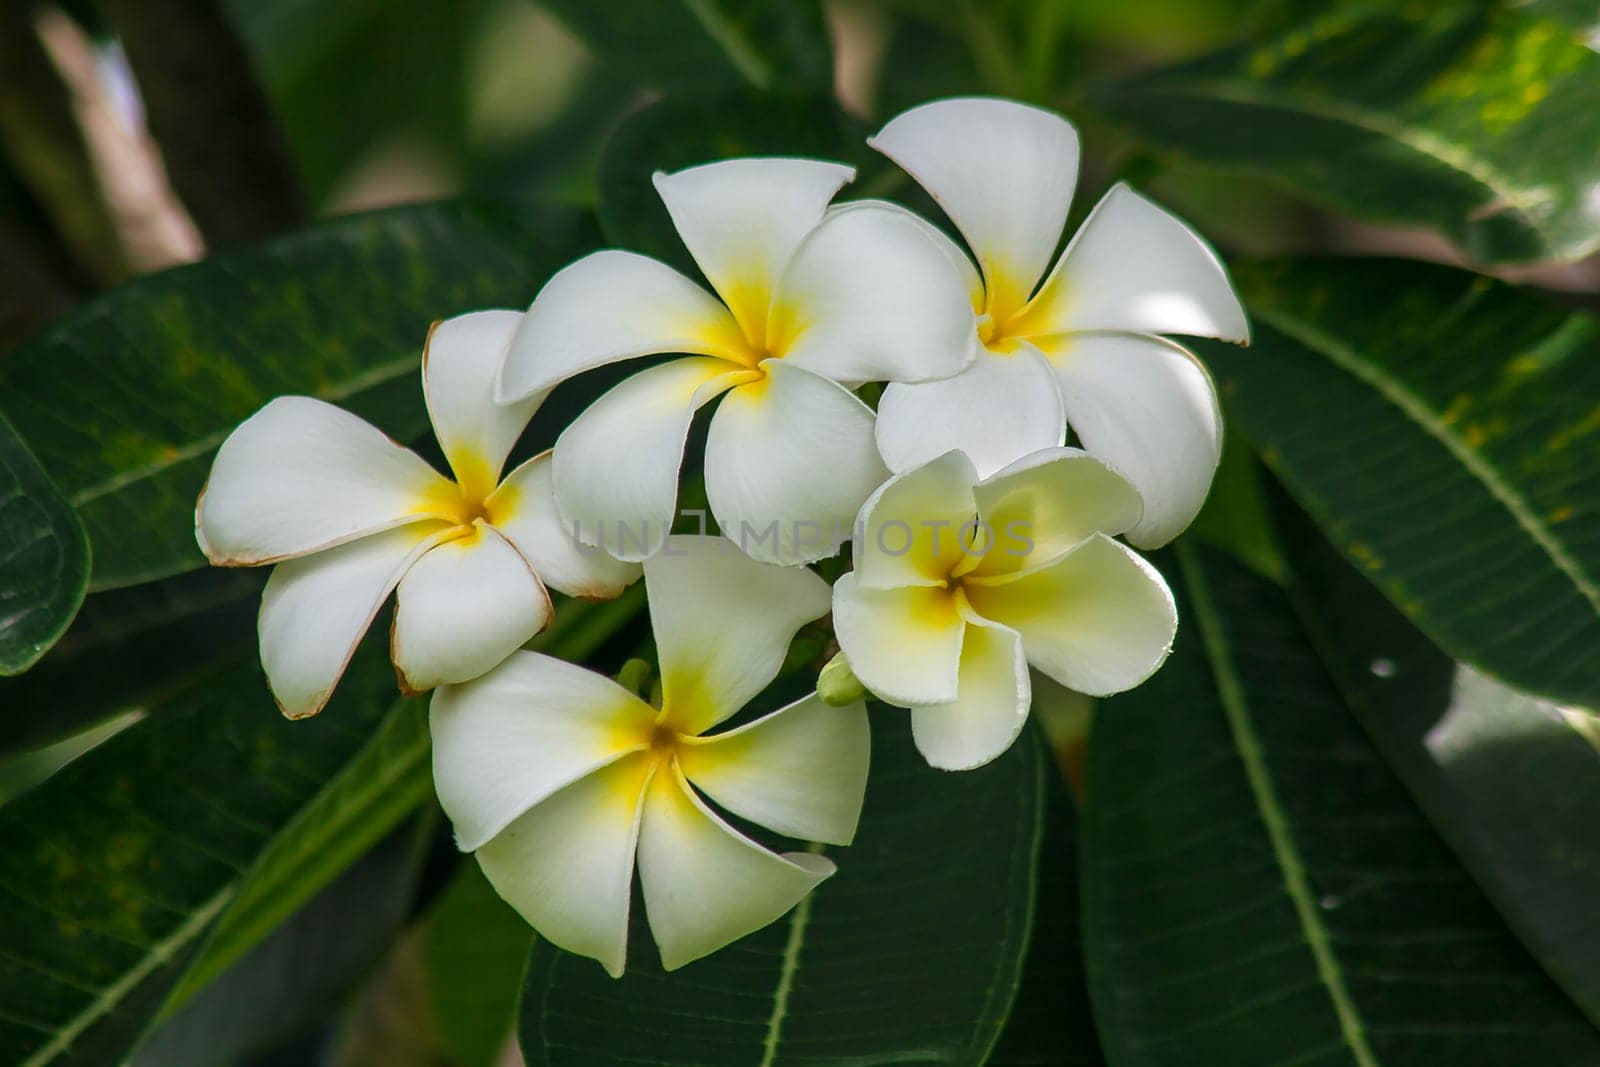 Yellow Frangipani that is blooming in nature by Puripatt